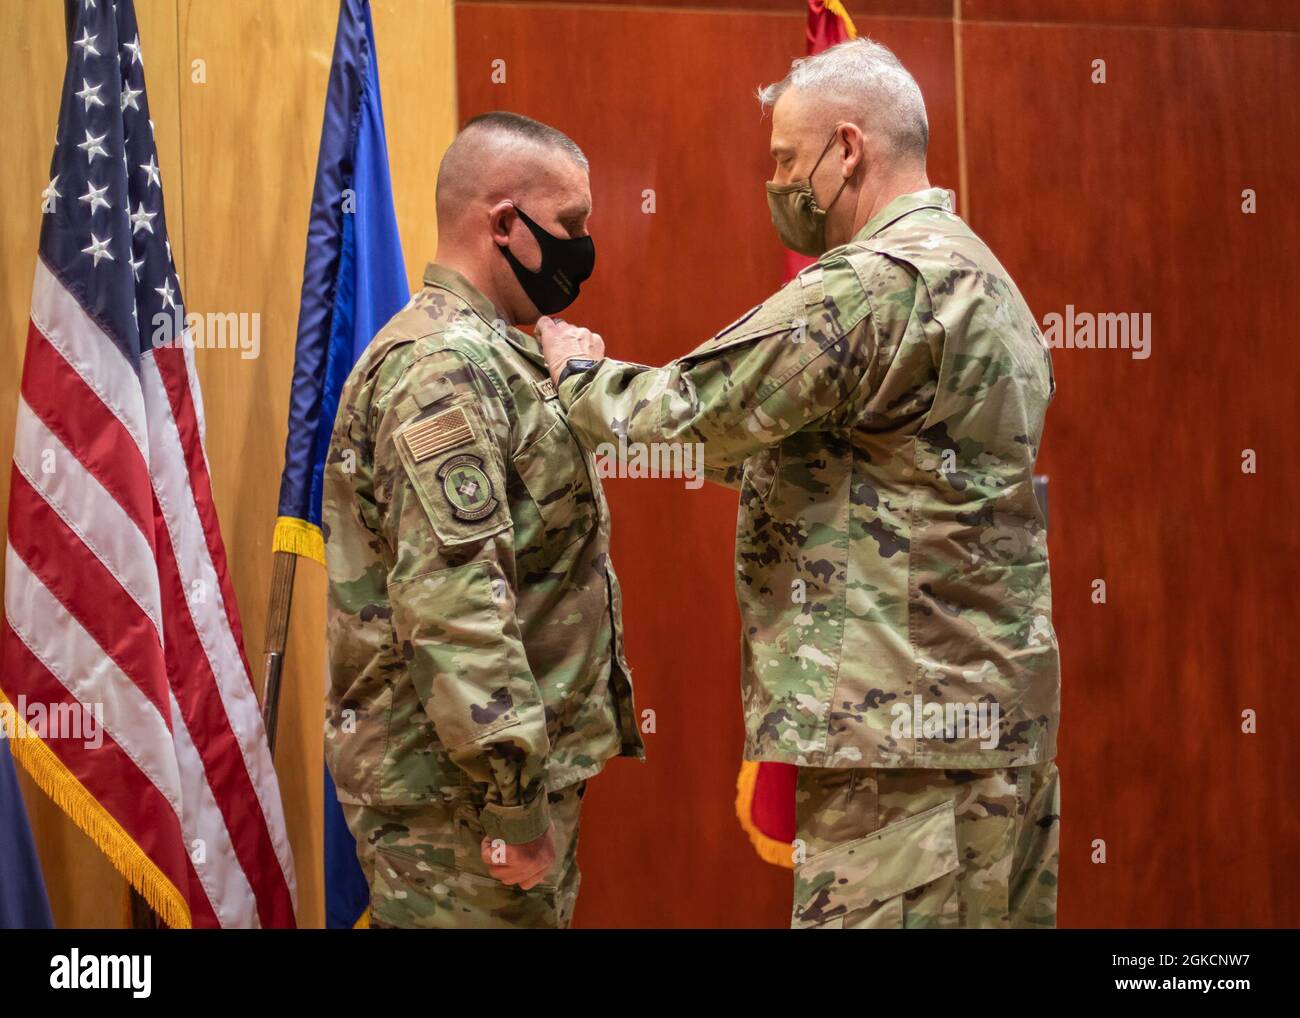 Tech. Sgt. Erik Bornemeier, a medical technician assigned to the 151st Medical Group, Detachment 1, receives the Utah Cross from The Adjutant General of the Utah National Guard Maj. Gen. Michael J. Turley on March 15, 2021 at Roland R. Wright Air National Guard Base, Utah. The Utah Cross is the second highest state award that an Utah National Guard military member can receive. Stock Photo